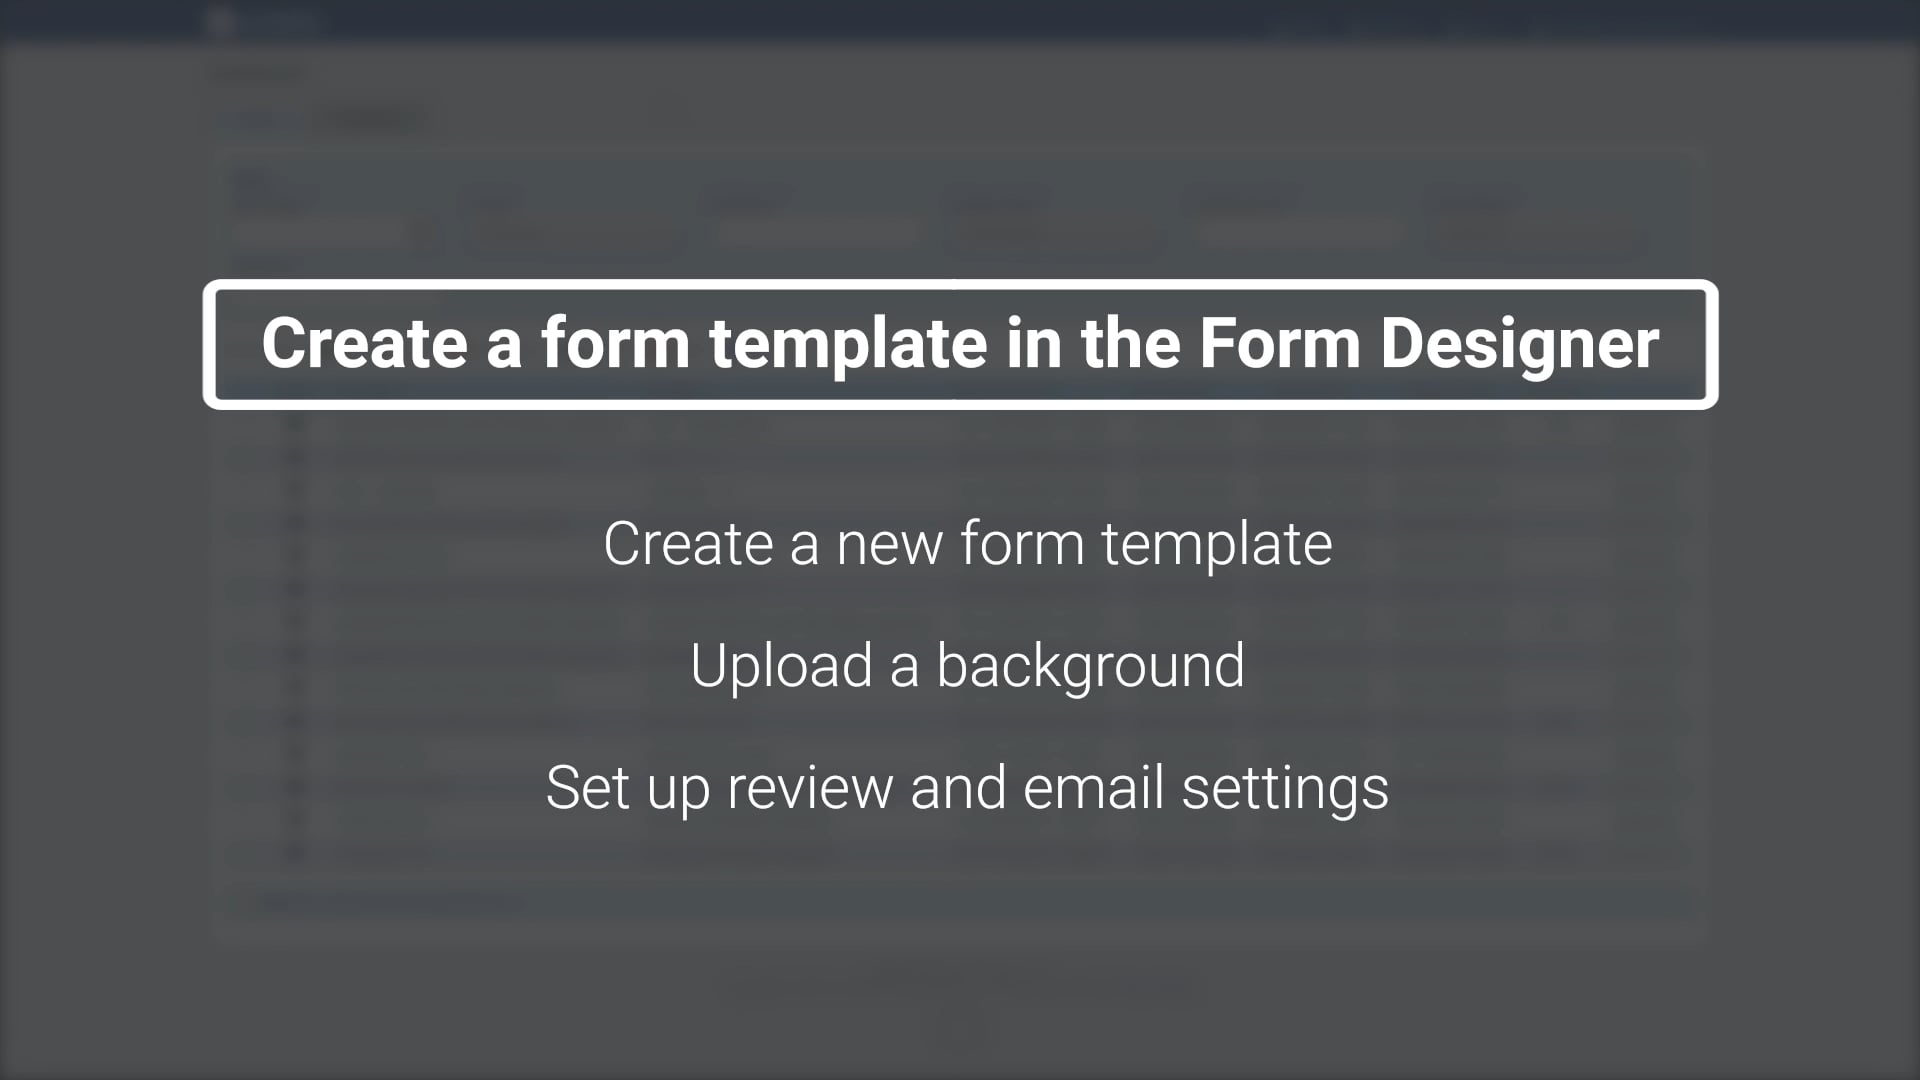 eforms-how-to-create-a-form-template-in-the-form-designer-on-vimeo